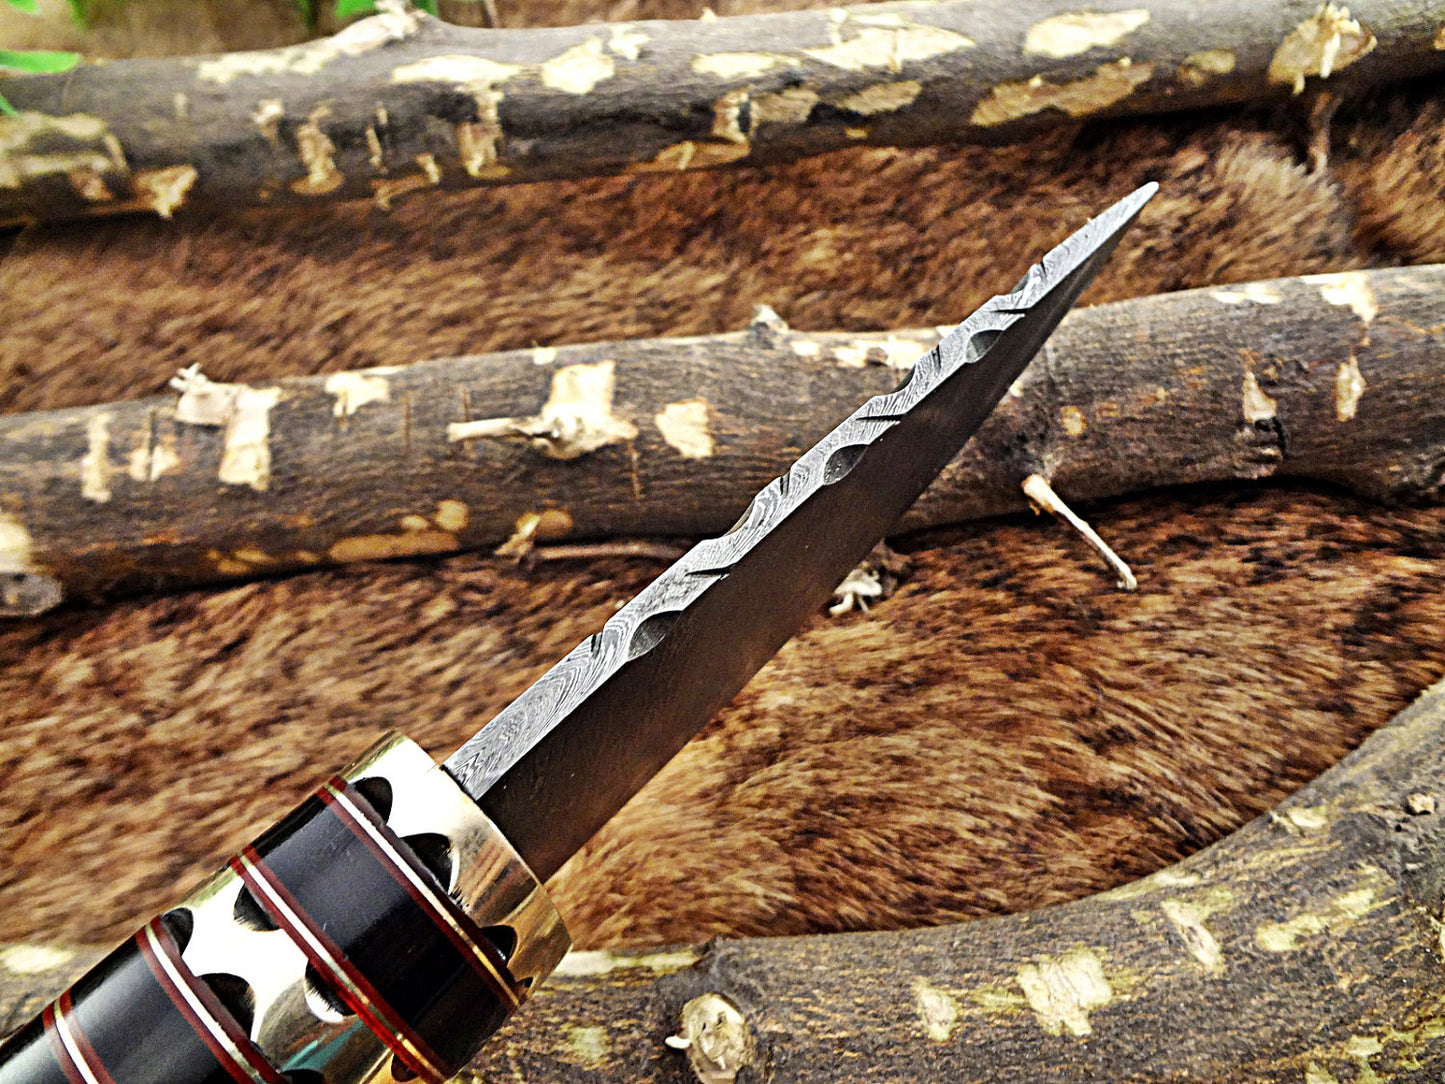 9" Long hand forged Damascus steel Knife, Buffalo Horn round scale with engraved Brass and fiber spacing, cow hide Leather sheath